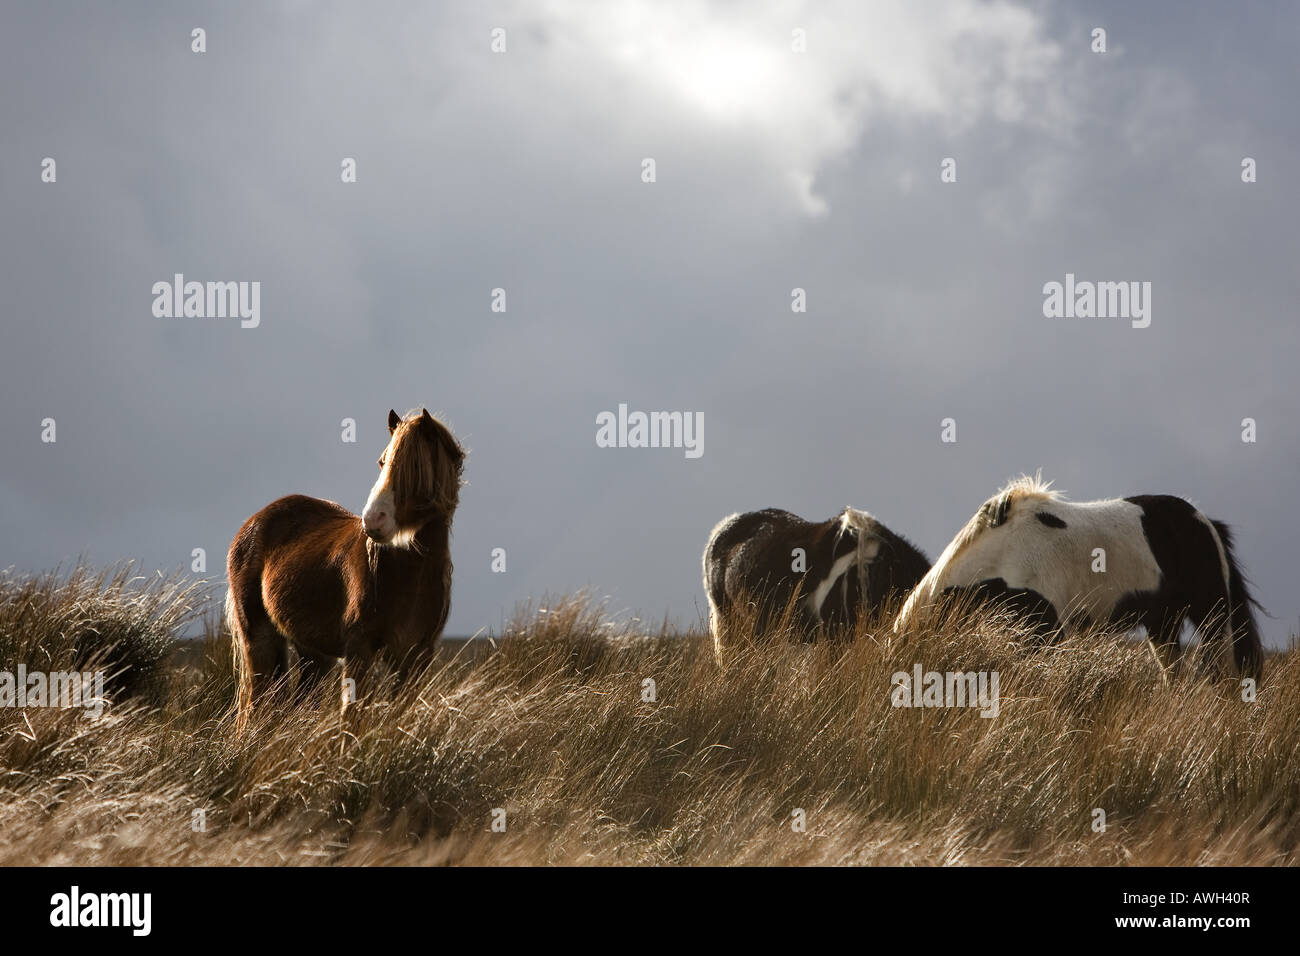 Sunlight on wild horses against a dark stormy cloudy sky. Yorkshire dales, Cumbria, England Stock Photo